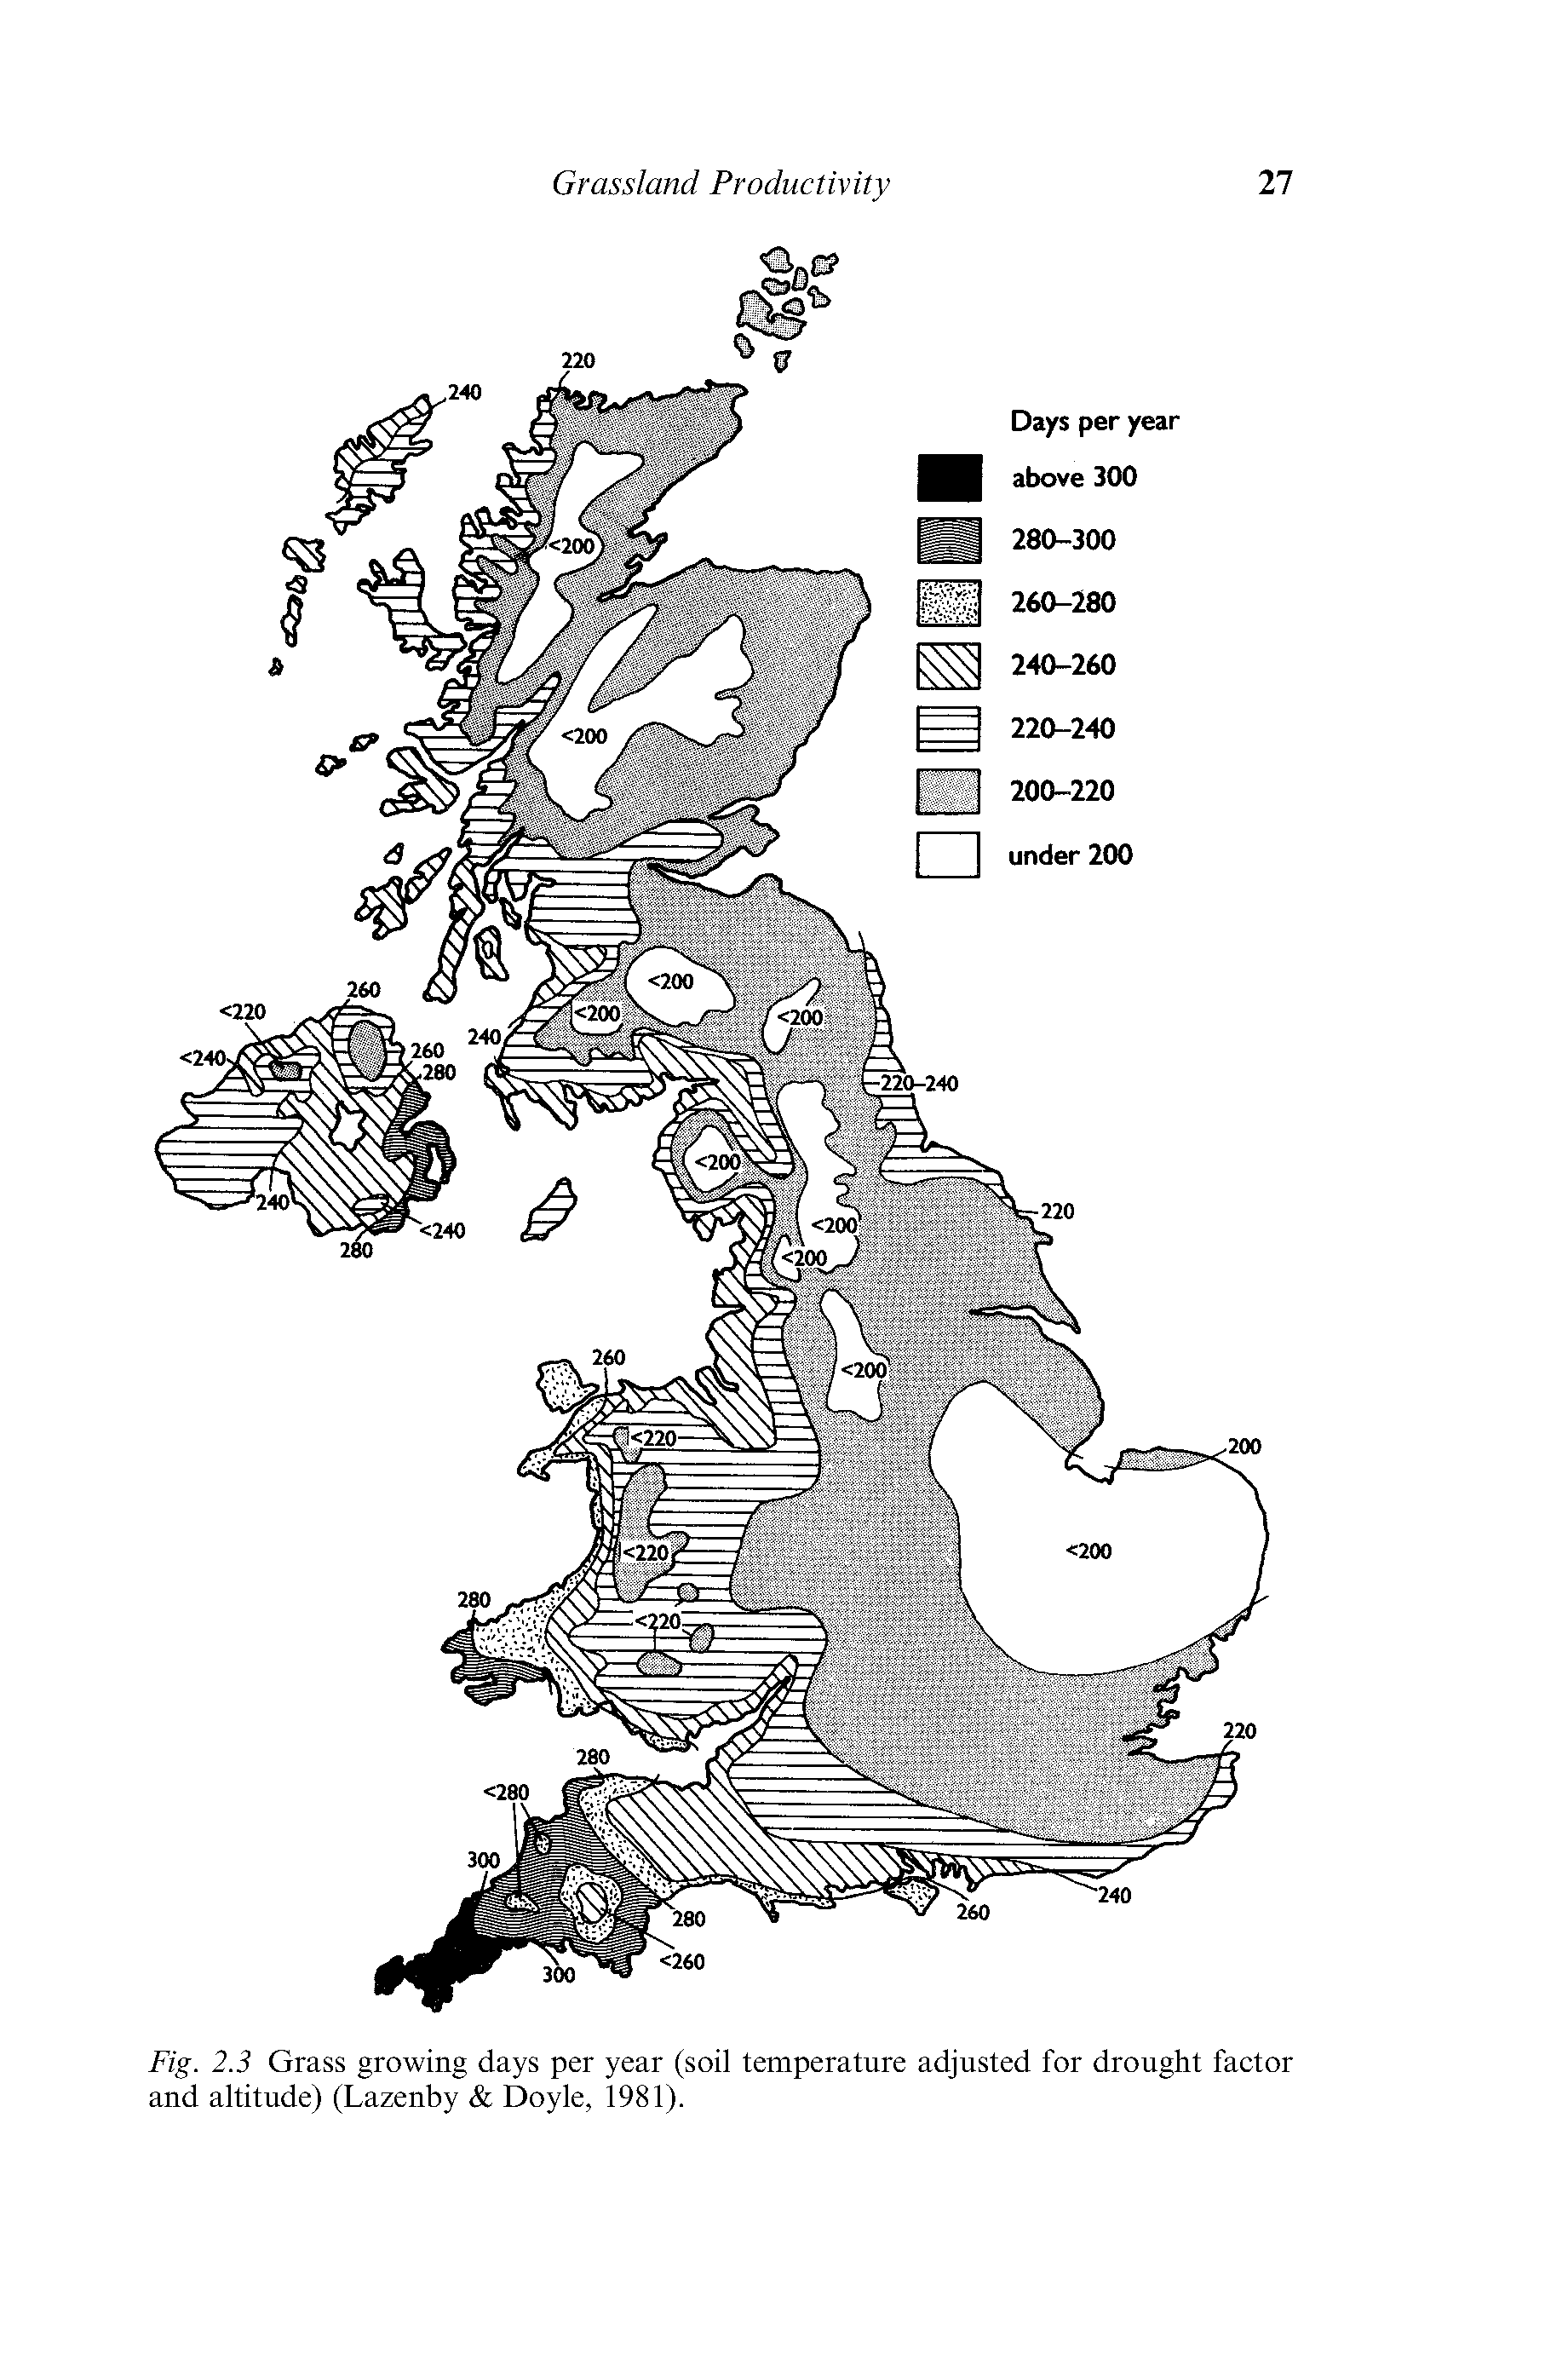 Fig. 2.3 Grass growing days per year (soil temperature adjusted for drought factor and altitude) (Lazenby Doyle, 1981).